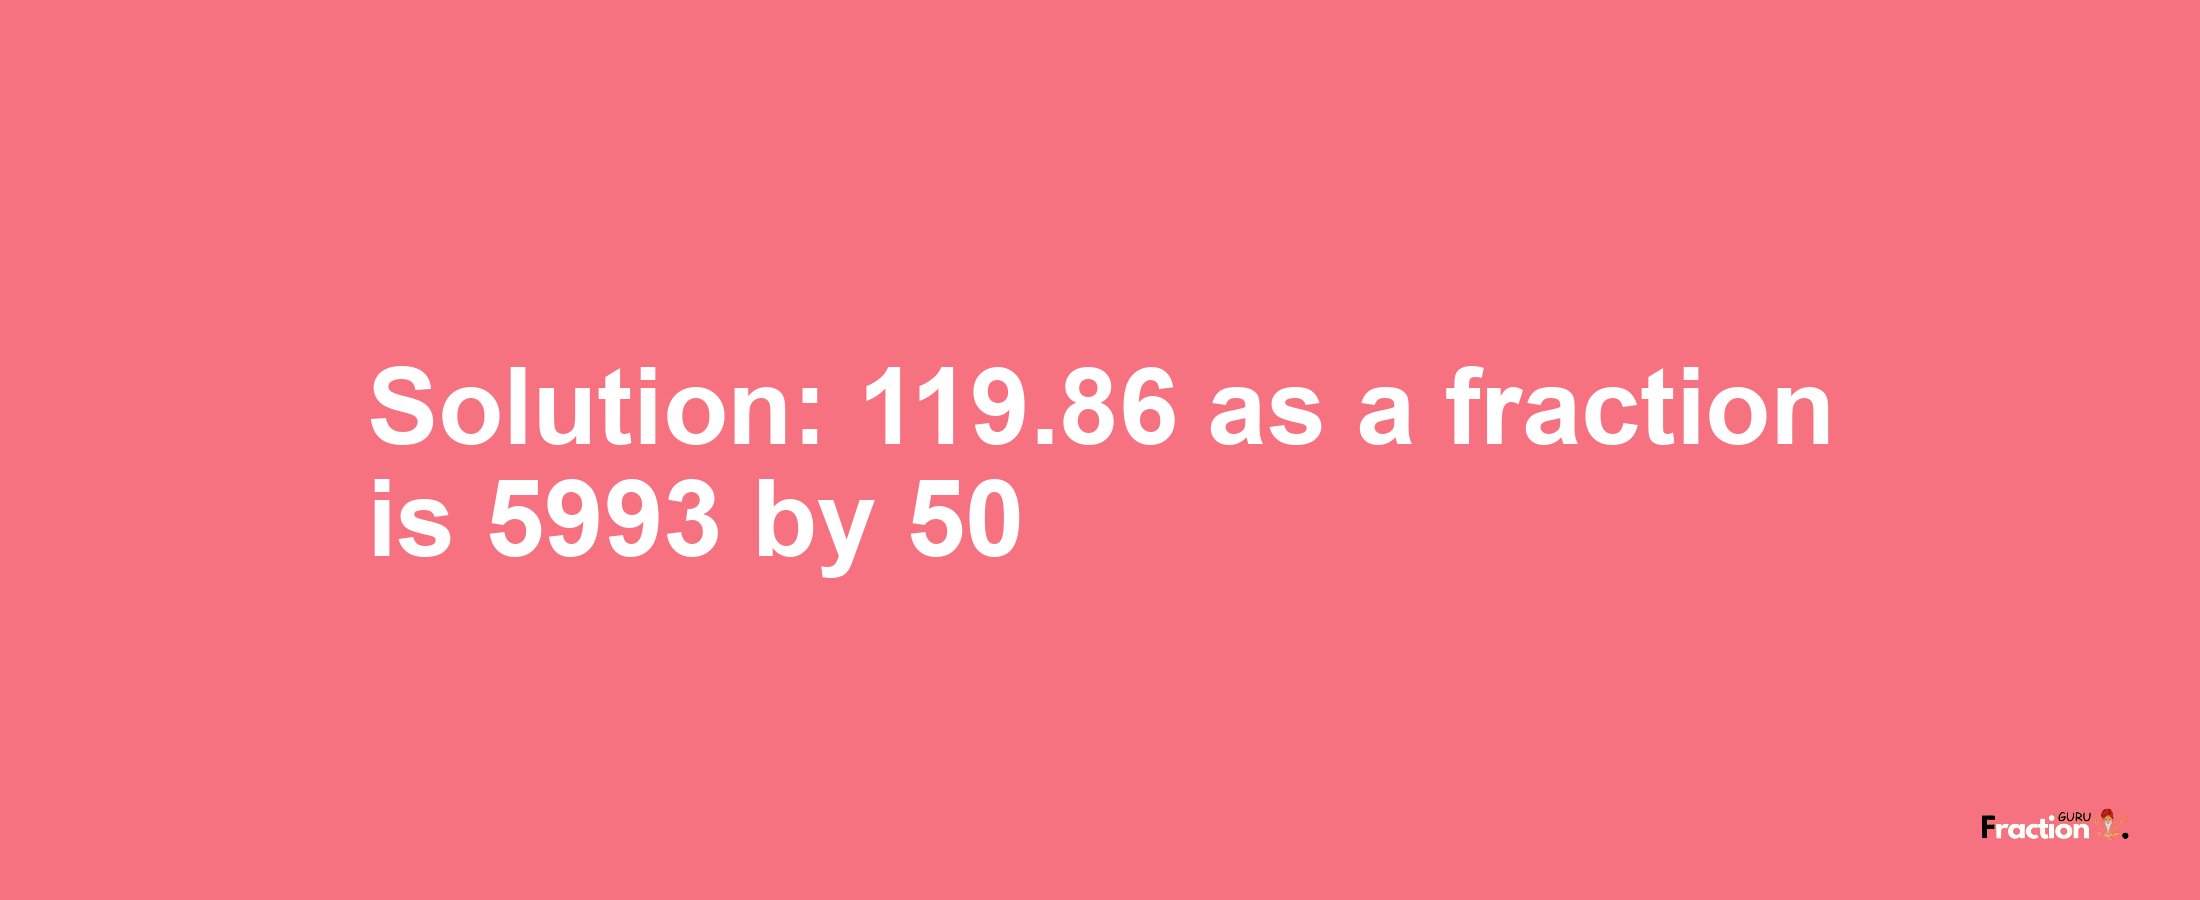 Solution:119.86 as a fraction is 5993/50